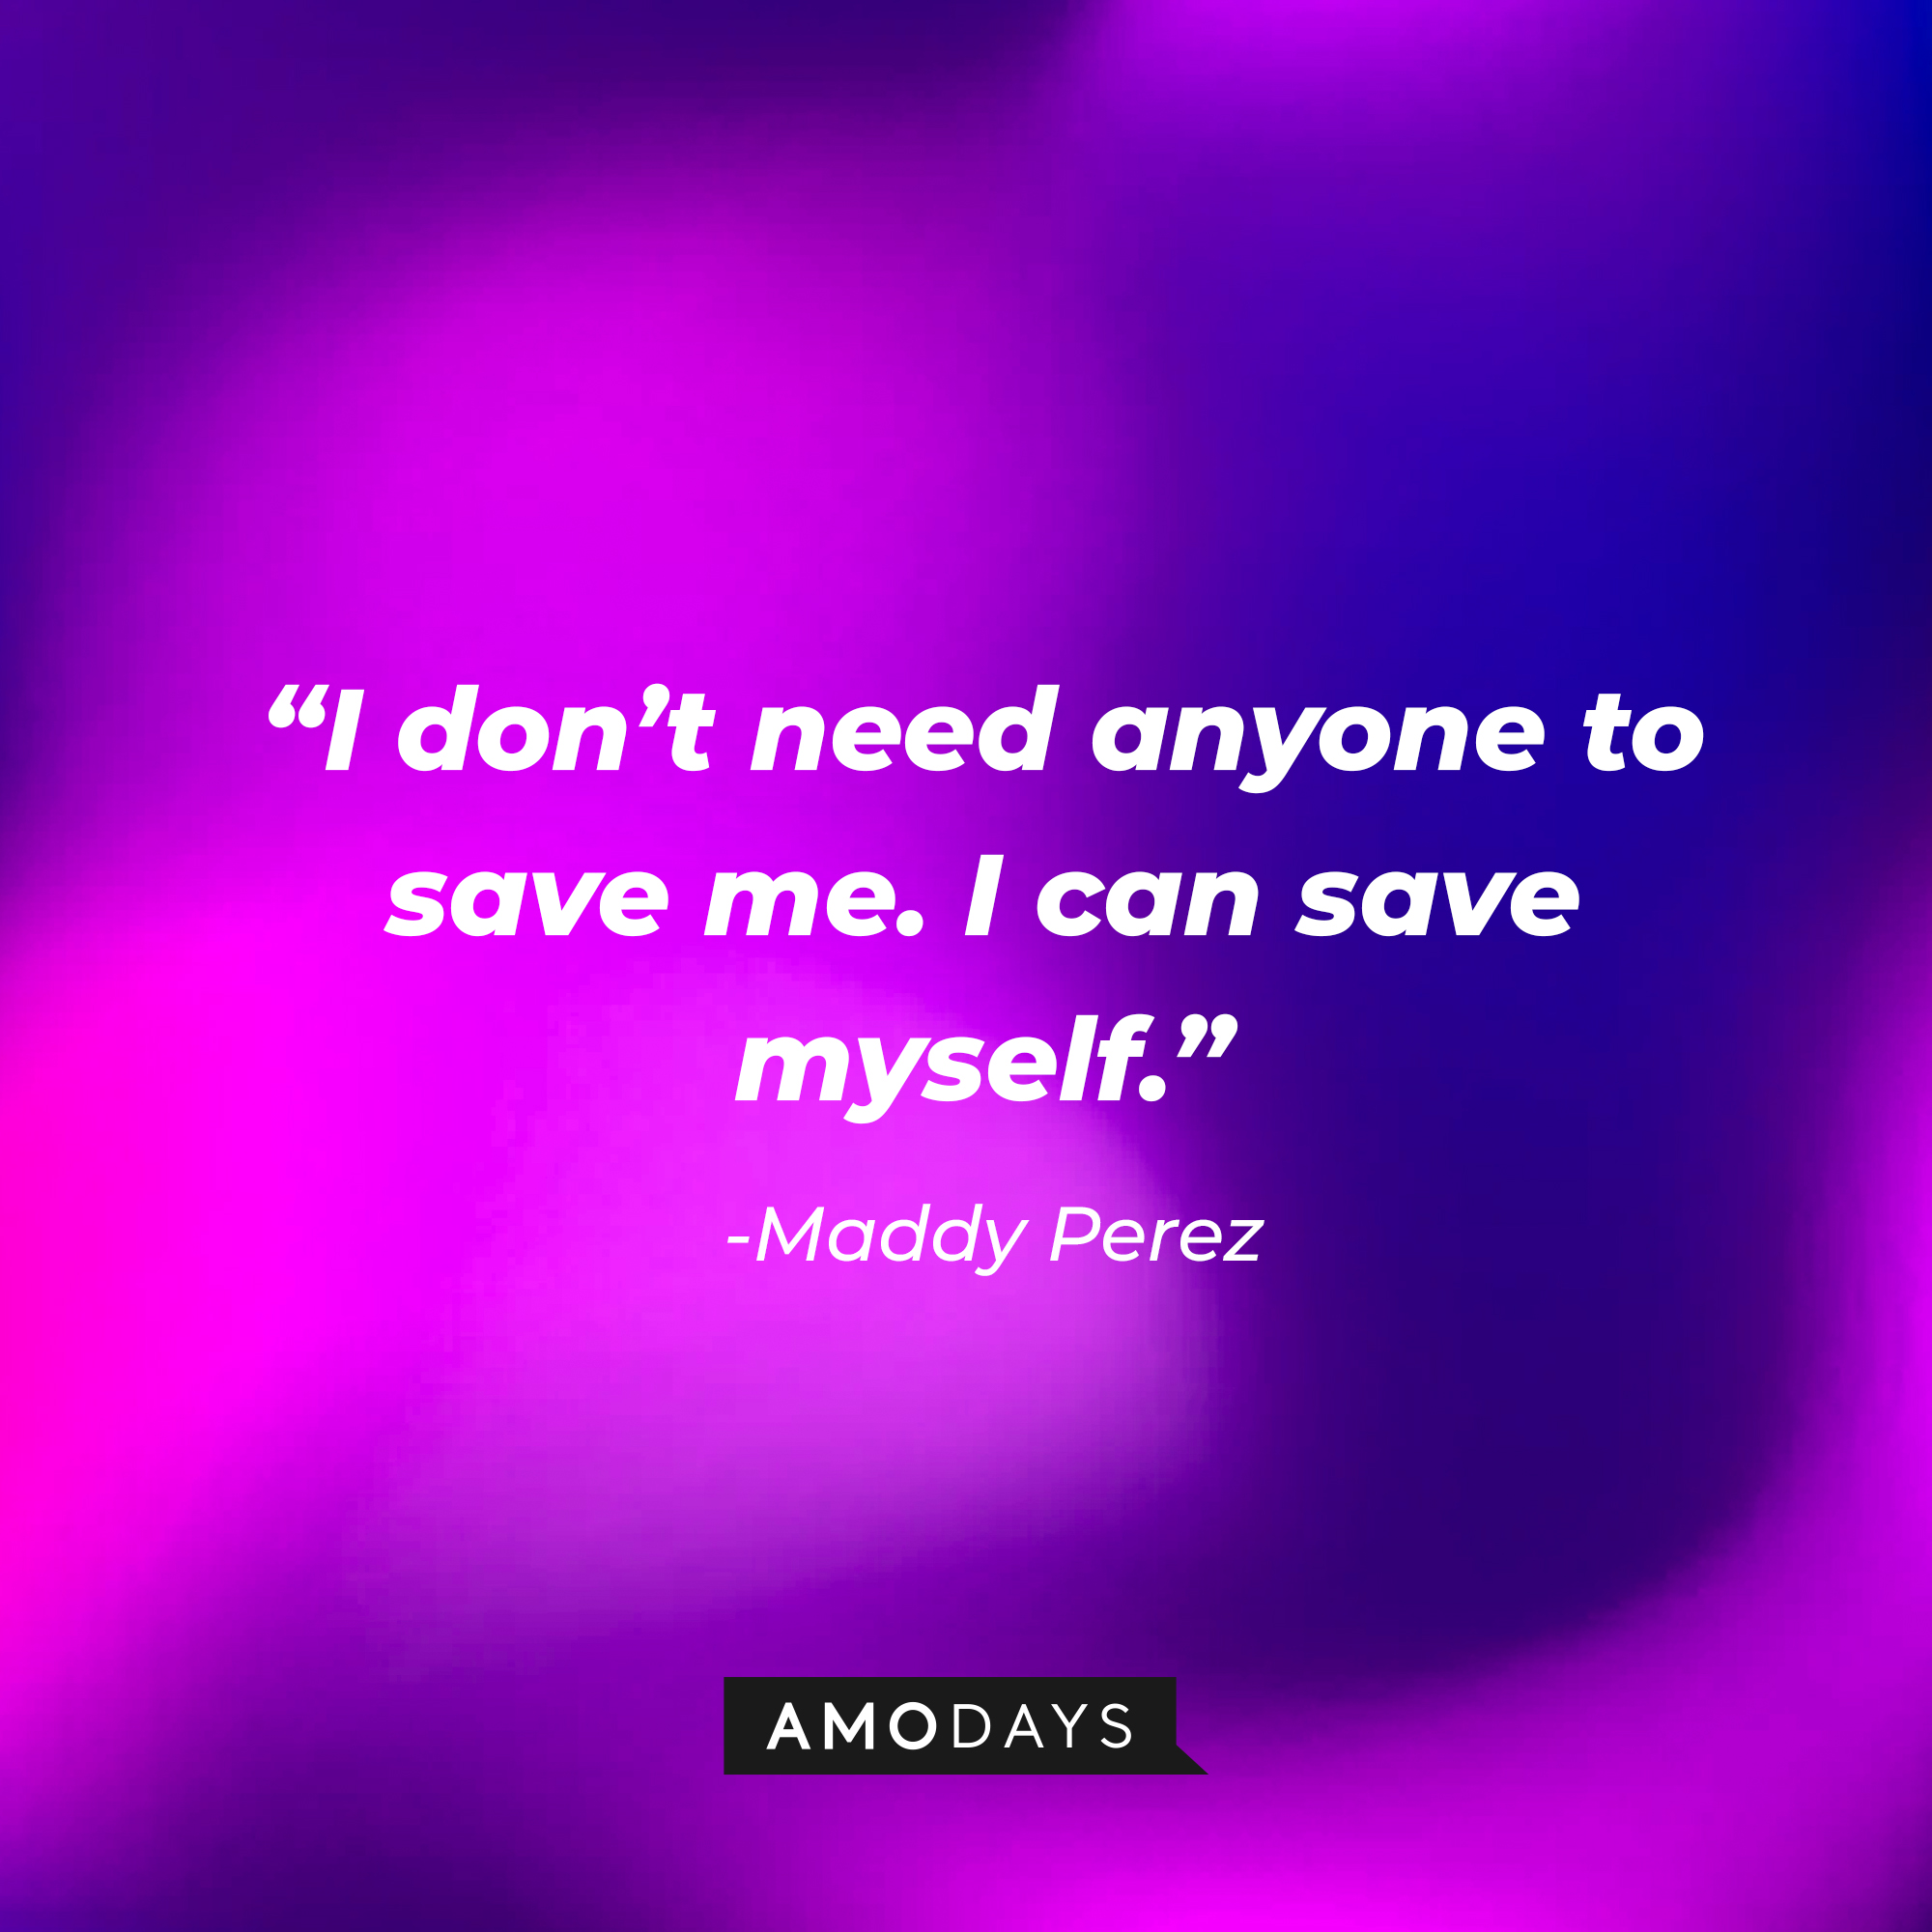 Maddy Perez’ quote: “I don’t need anyone to save me. I can save myself.” | Source: AmoDays